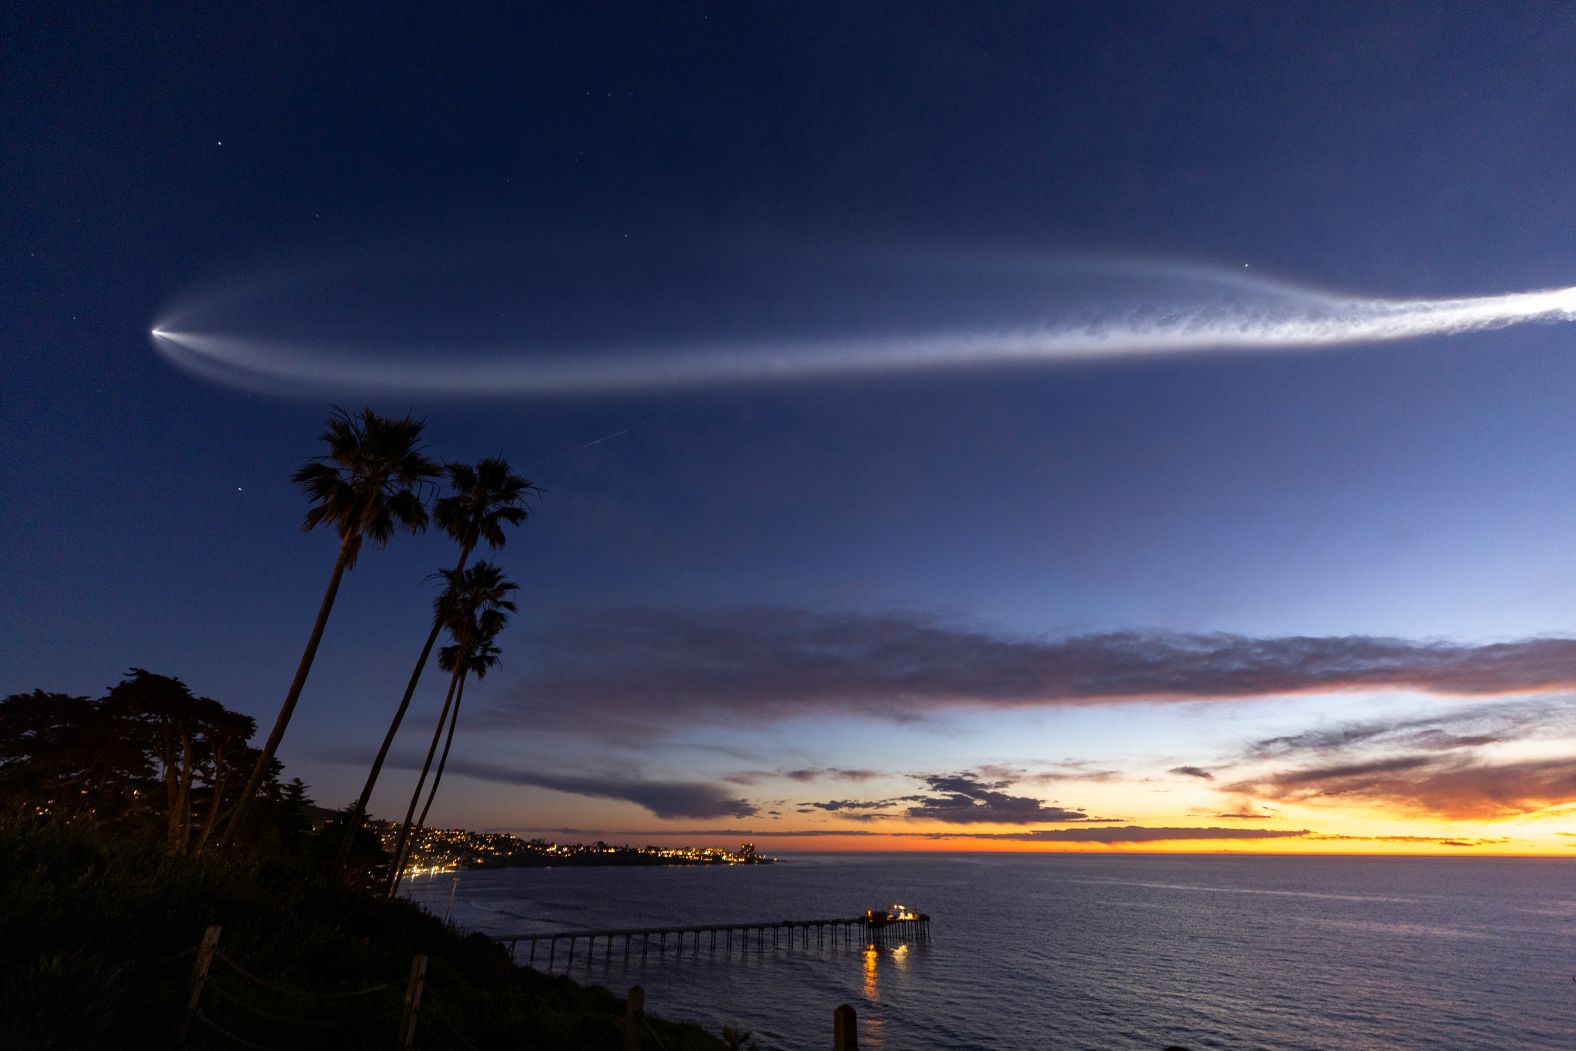 A SpaceX Falcon 9 rocket carrying a payload of 22 Starlink internet satellite into space soars across the sky, as seen from San Diego, on Monday, March 18. <a href="https://www.cnn.com/2024/03/14/world/gallery/photos-this-week-march-7-march-14/index.html" target="_blank">See last week in 36 photos</a>.